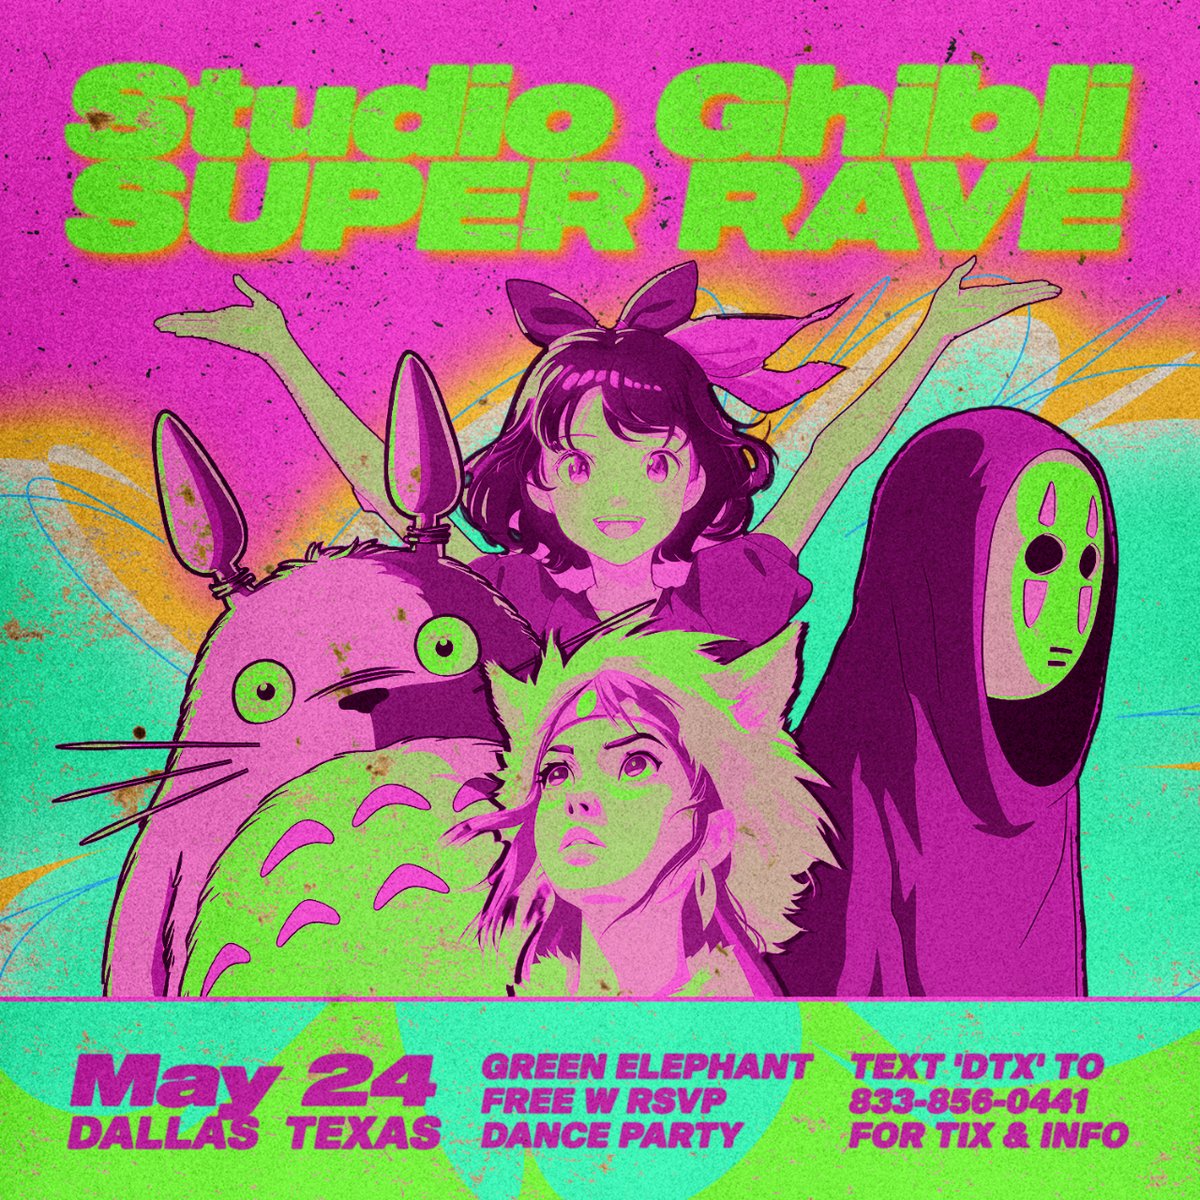 Been wanting to do this one for a while, and we know you guys have a Totoro onesie lying around, so...💖 05.24 // Sutdio Ghibli RAVE // Green Elephant - Dallas RSVP by Texting 'DTX' to 833-856-0441.